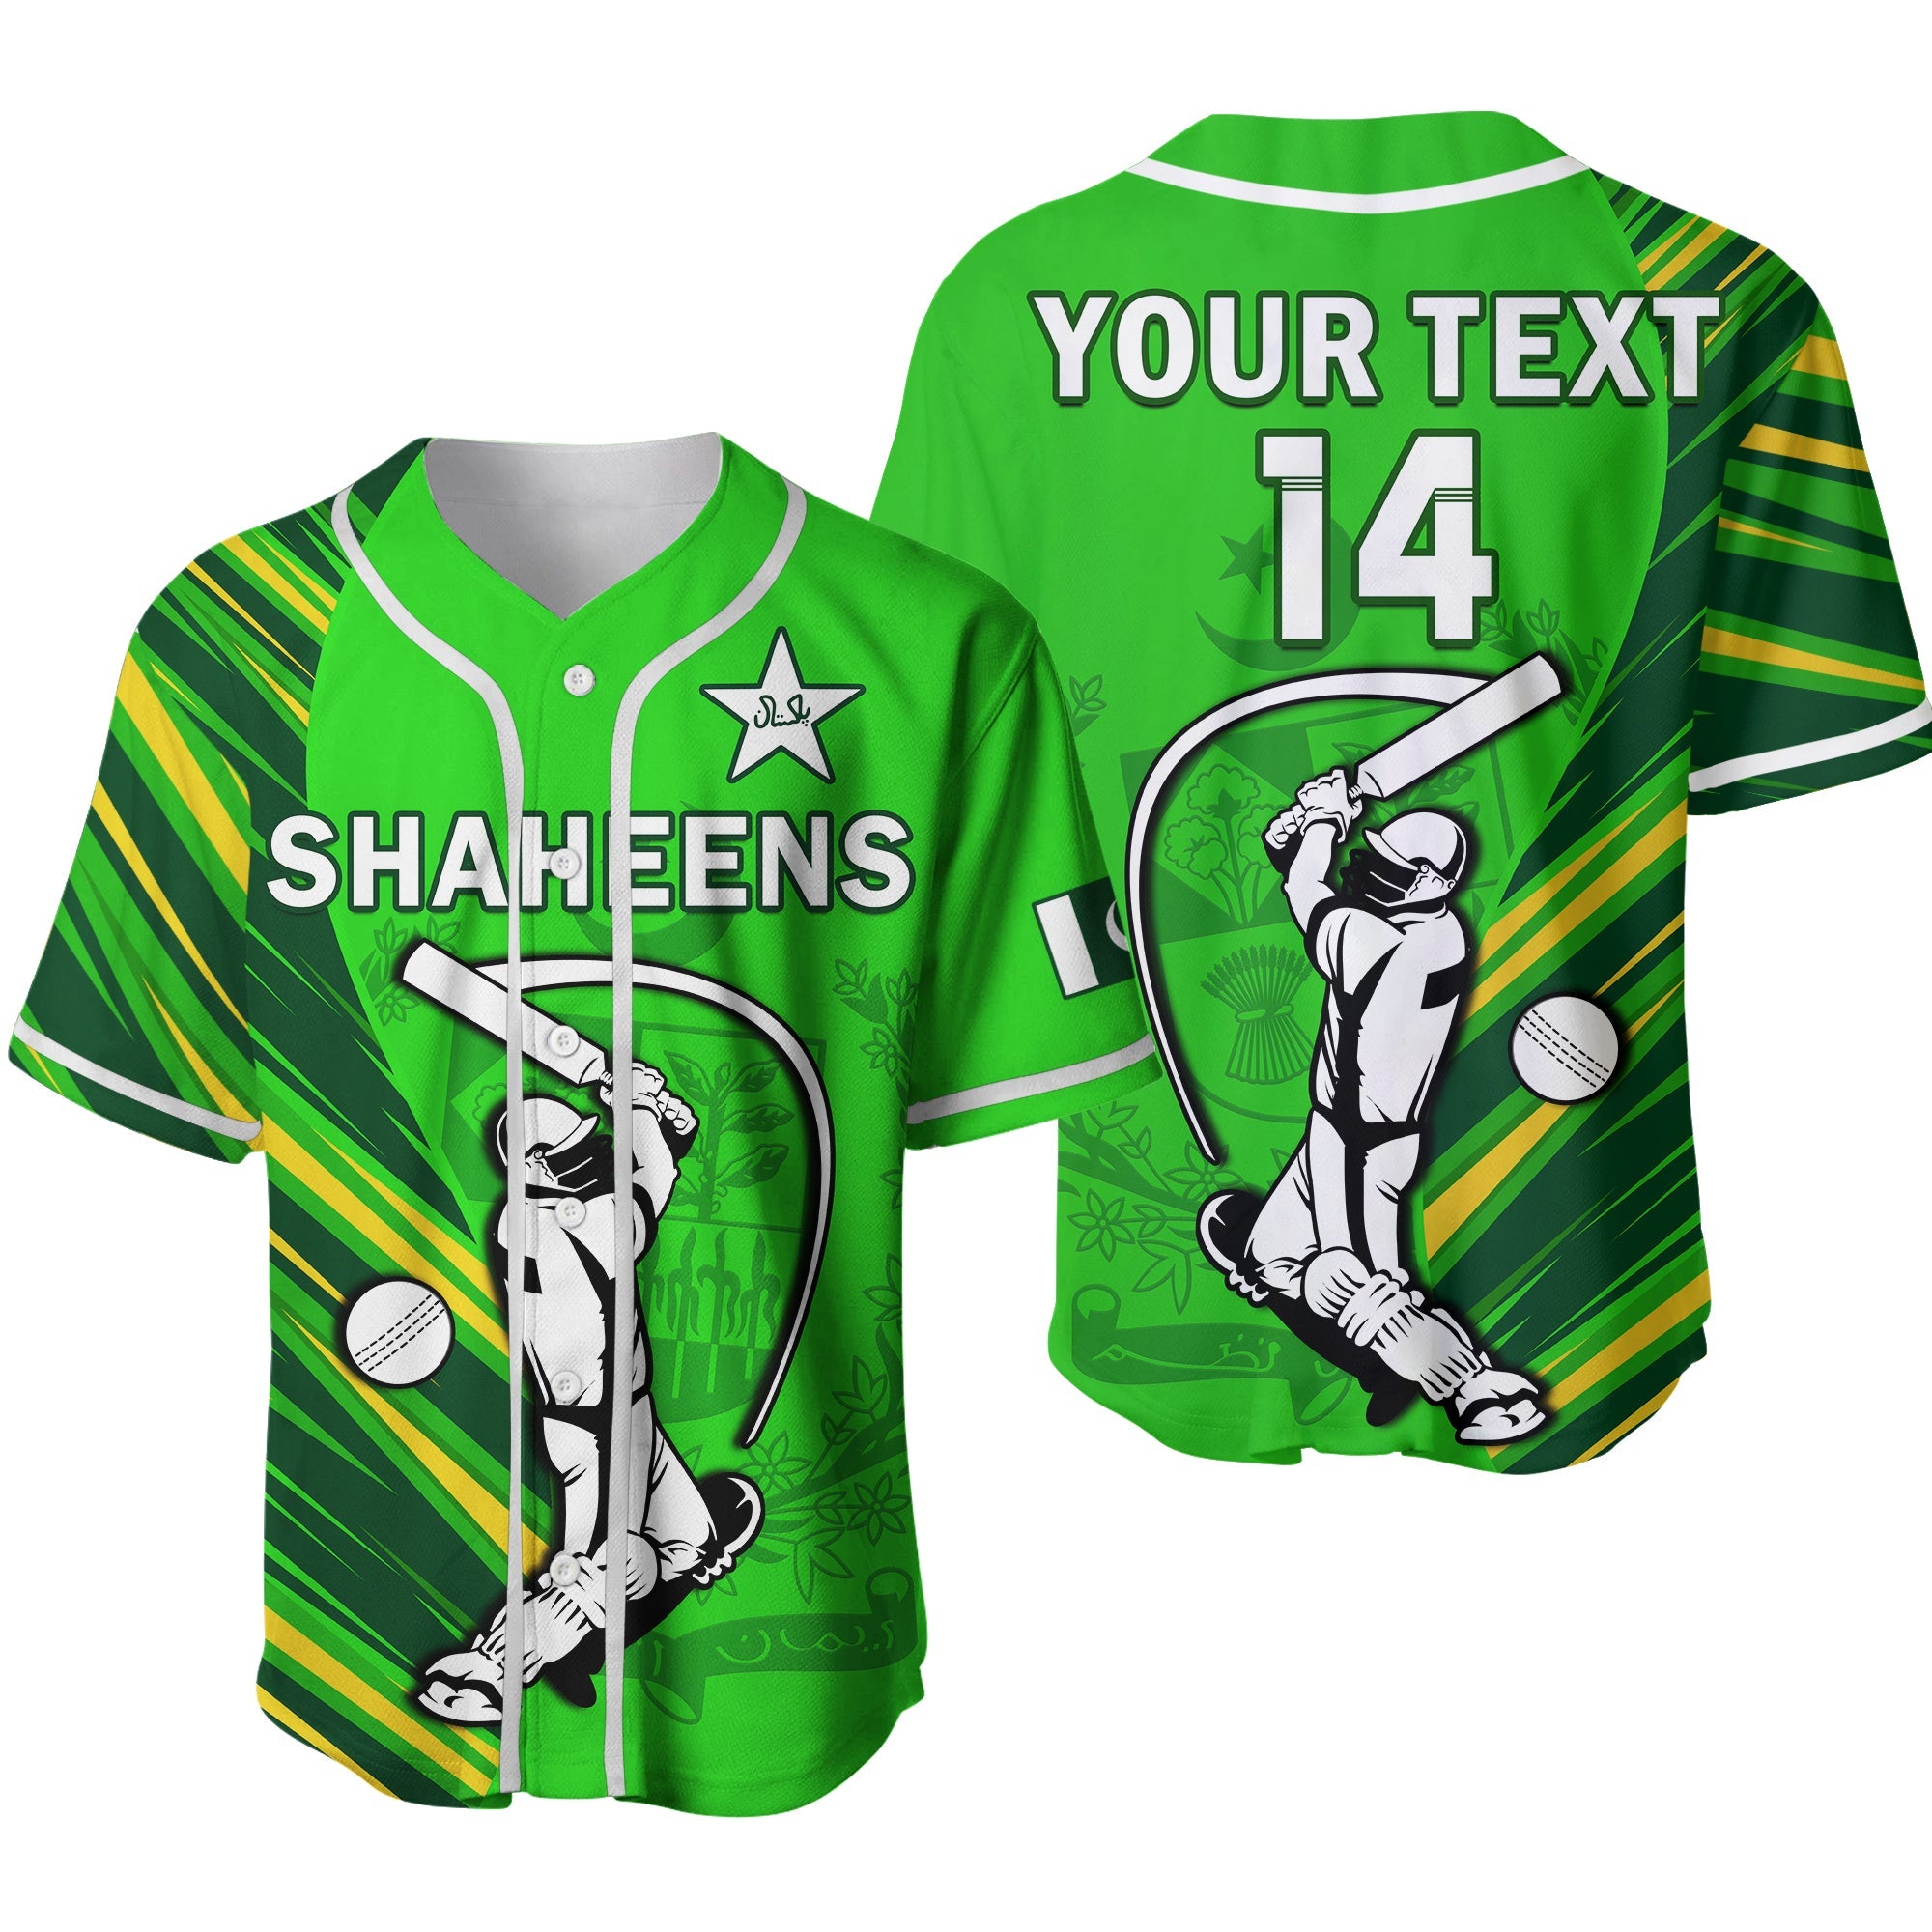 custom-text-and-number-pakistan-cricket-baseball-jersey-go-shaheens-simple-style-ver02